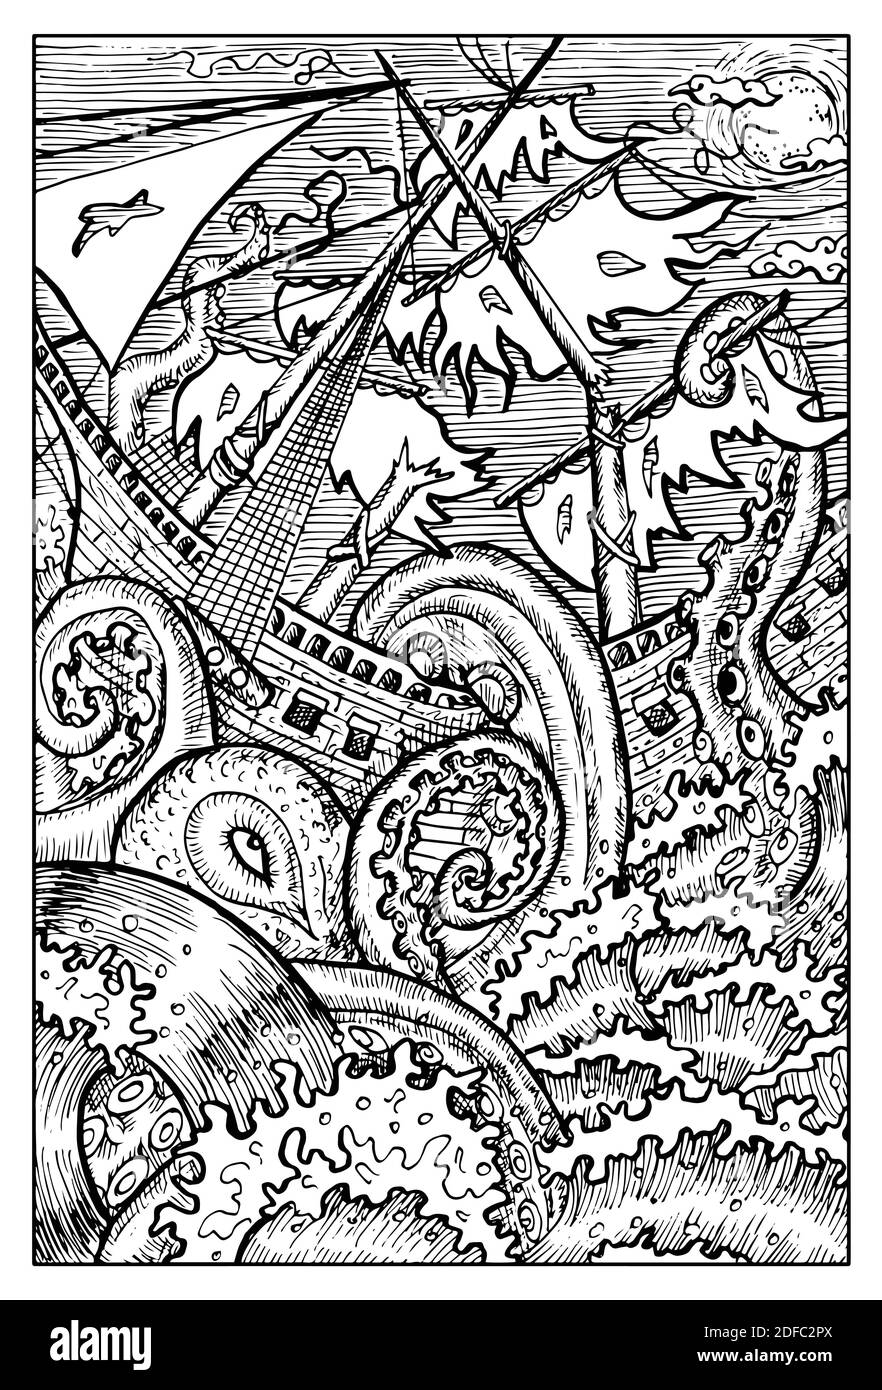 kraken. Engraved black and white Fantasy illustration with mythological creatures and characters Stock Vector